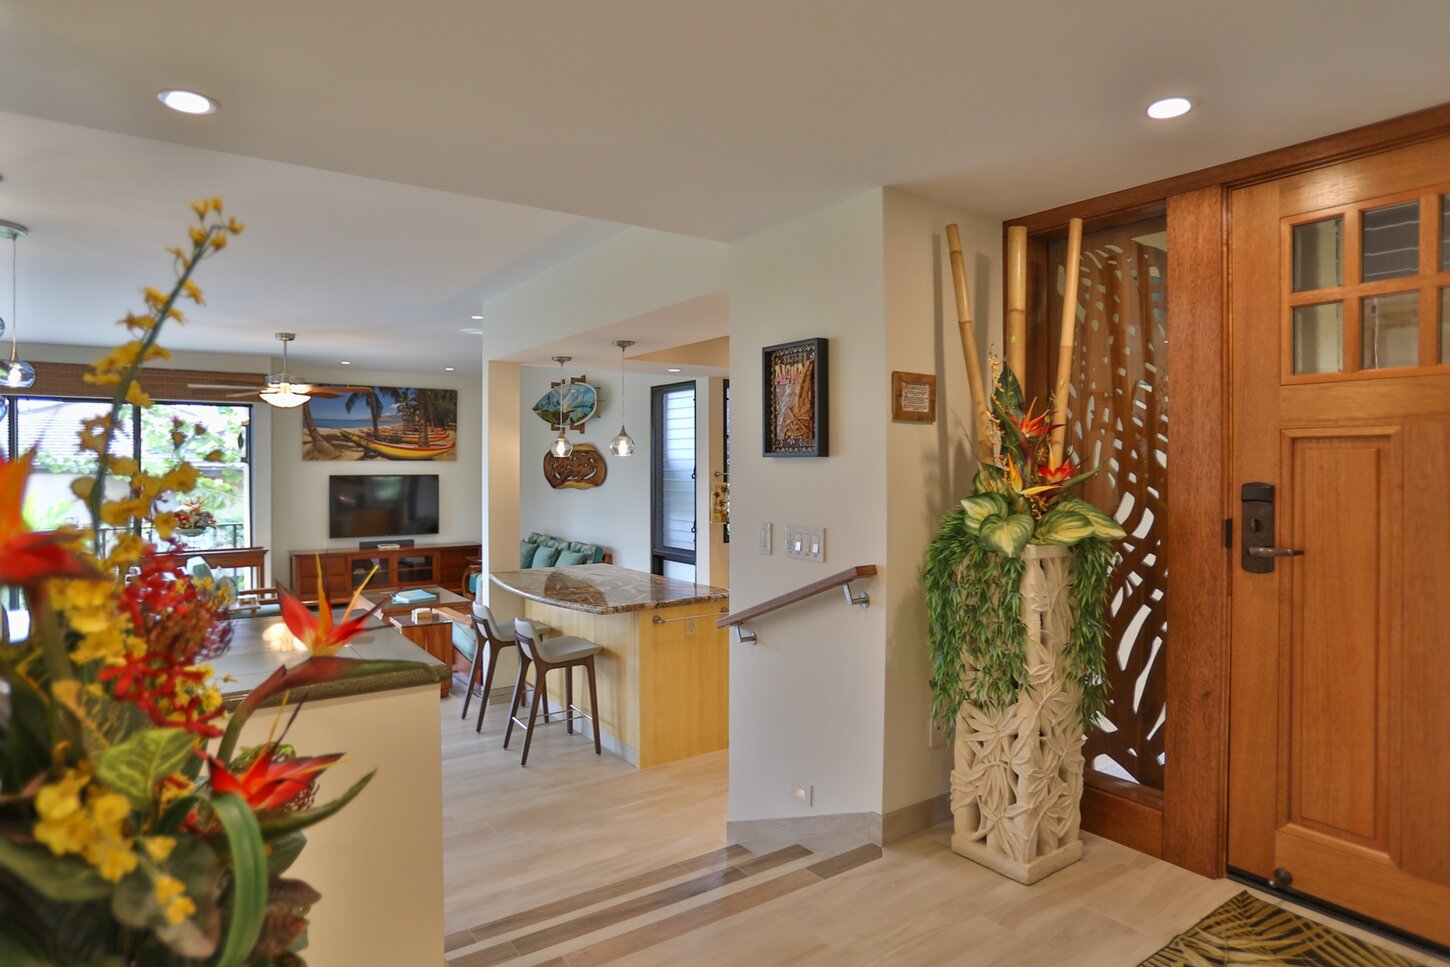 Our home has tropical furnishings and porcelain plank tile flooring throughout